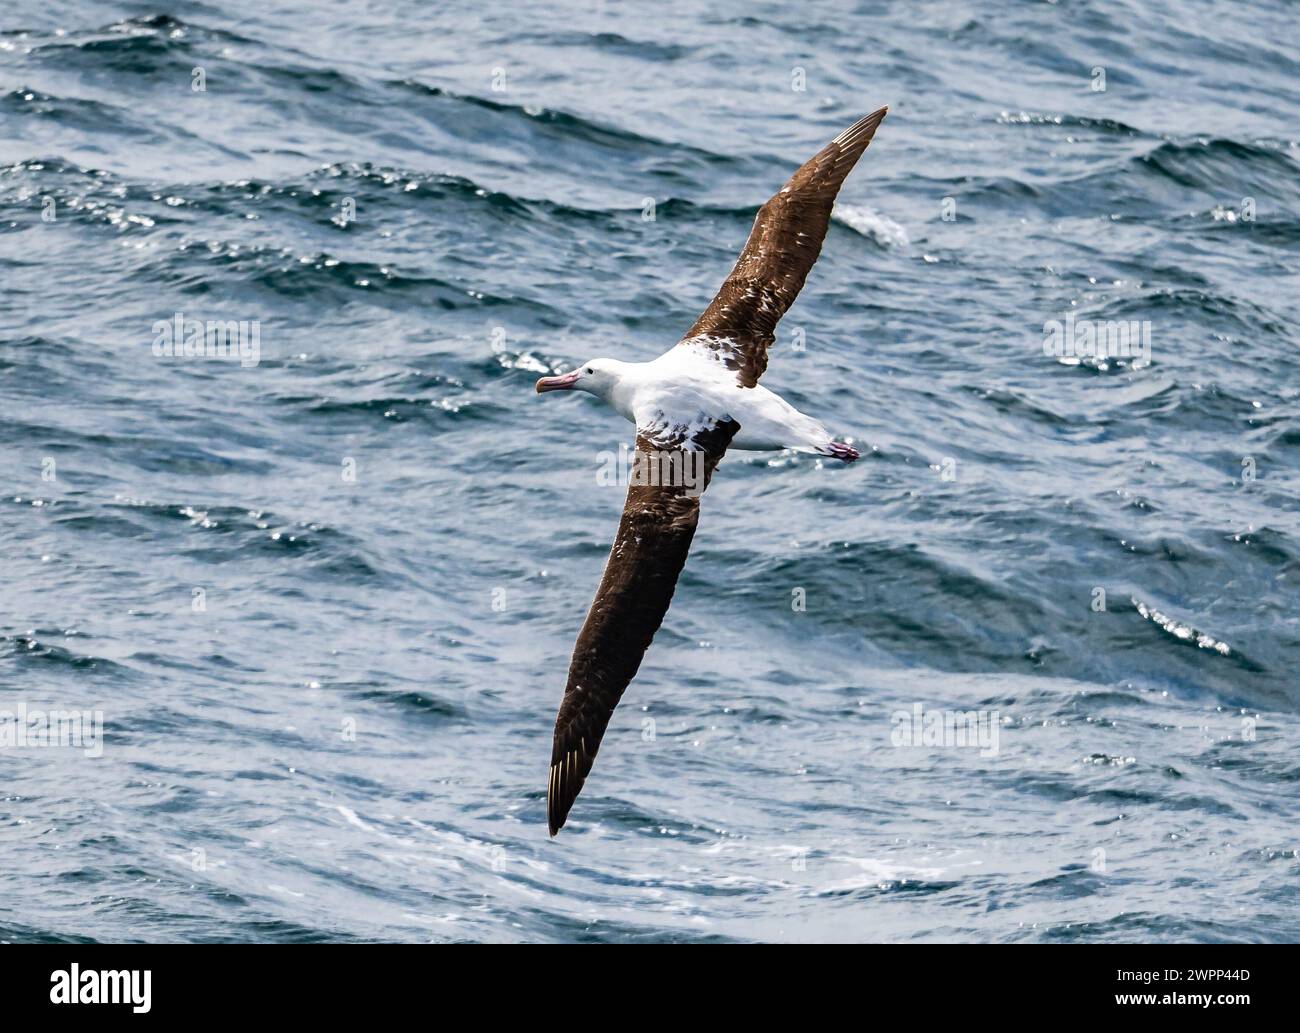 A Southern Royal Albatross (Diomedea epomophora) flying over ocean. Pacific Ocean, off the coast of Chile. Stock Photo